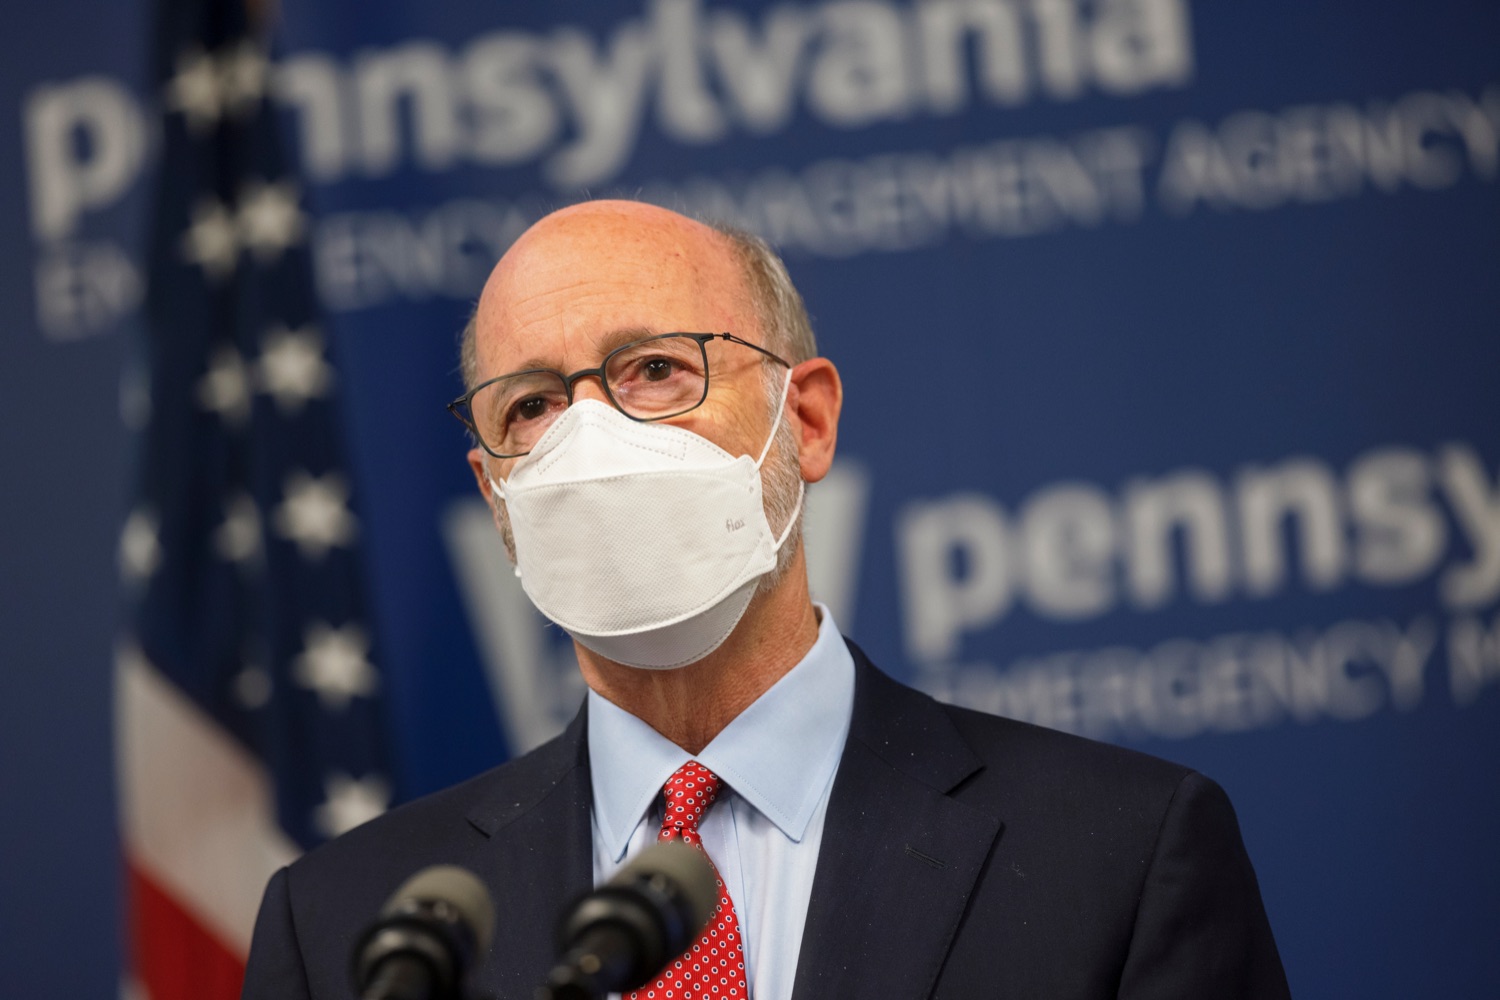 Governor Tom Wolf speaks during a press conference, which discussed the current state of COVID-19 and a new Secretary of Health order requiring masks to be worn inside K-12 school buildings, early learning programs and child care providers, inside Pennsylvania Emergency Management Agency in Harrisburg on Tuesday, August 31, 2021.<br><a href="https://filesource.amperwave.net/commonwealthofpa/photo/19089_GOV_School_Masking_NK_007.jpg" target="_blank">⇣ Download Photo</a>